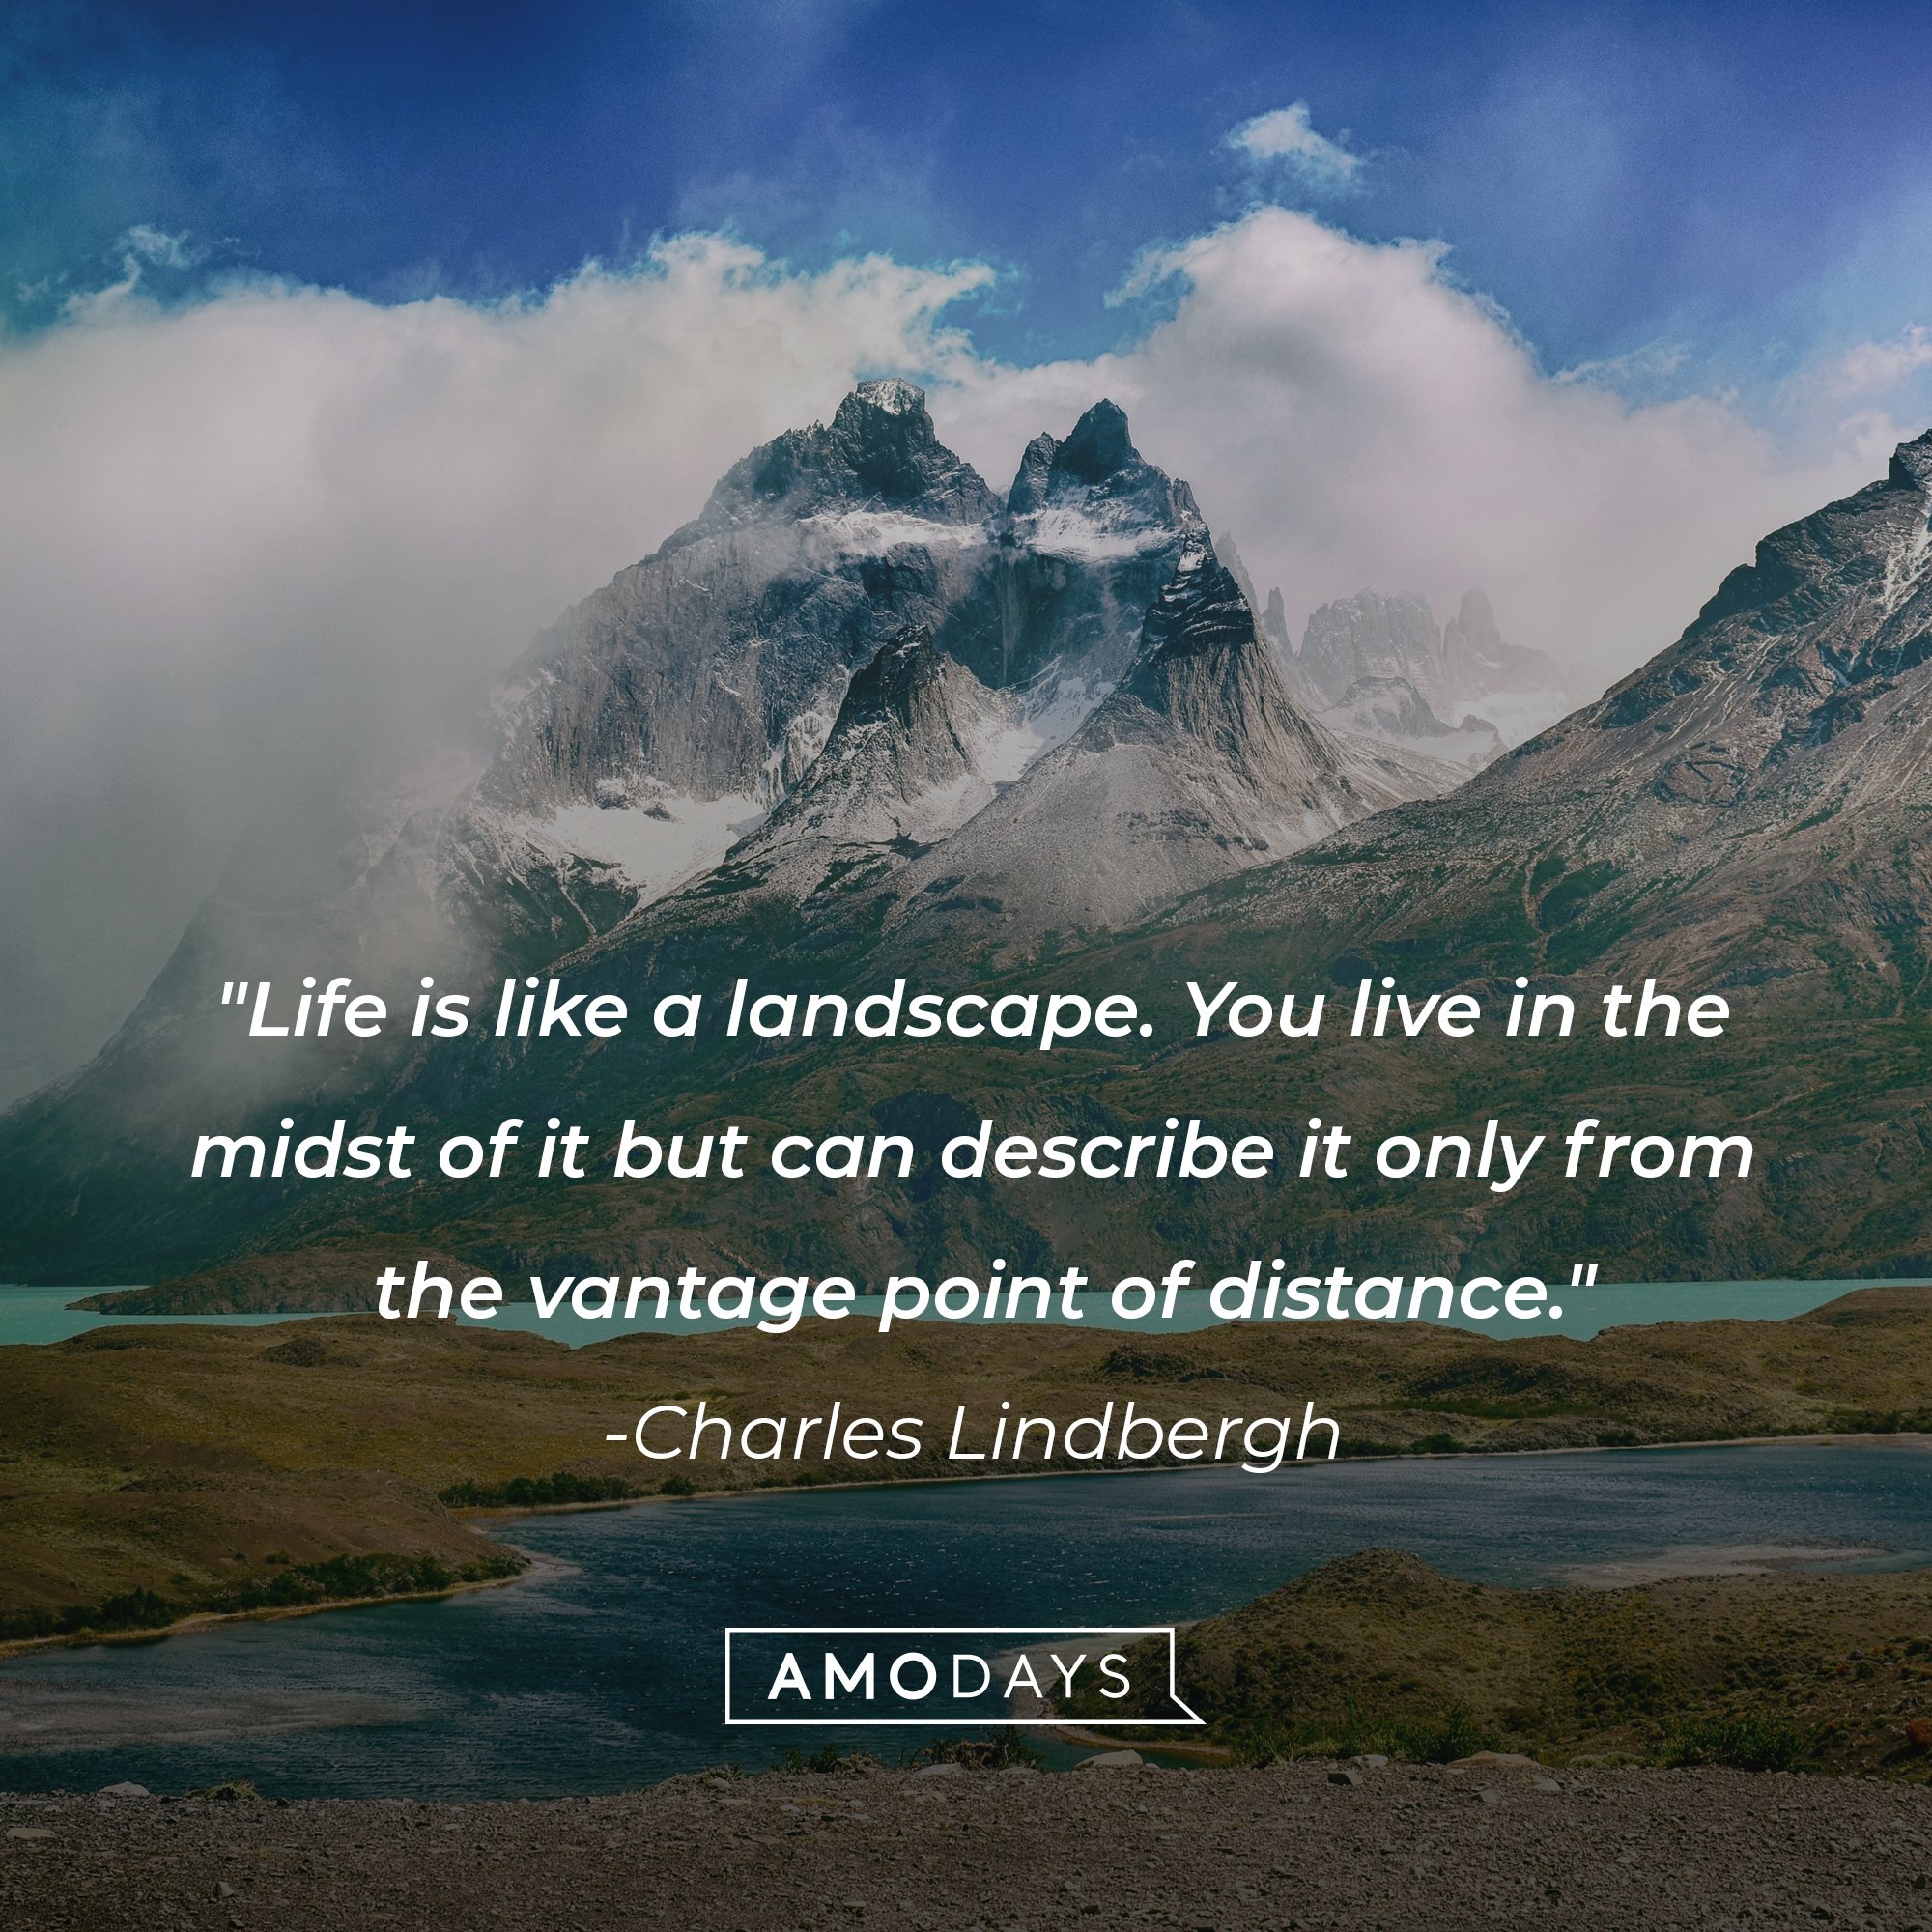 Charles Lindbergh's quote: "Life is like a landscape. You live in the midst of it but can describe it only from the vantage point of distance." | Image: AmoDays